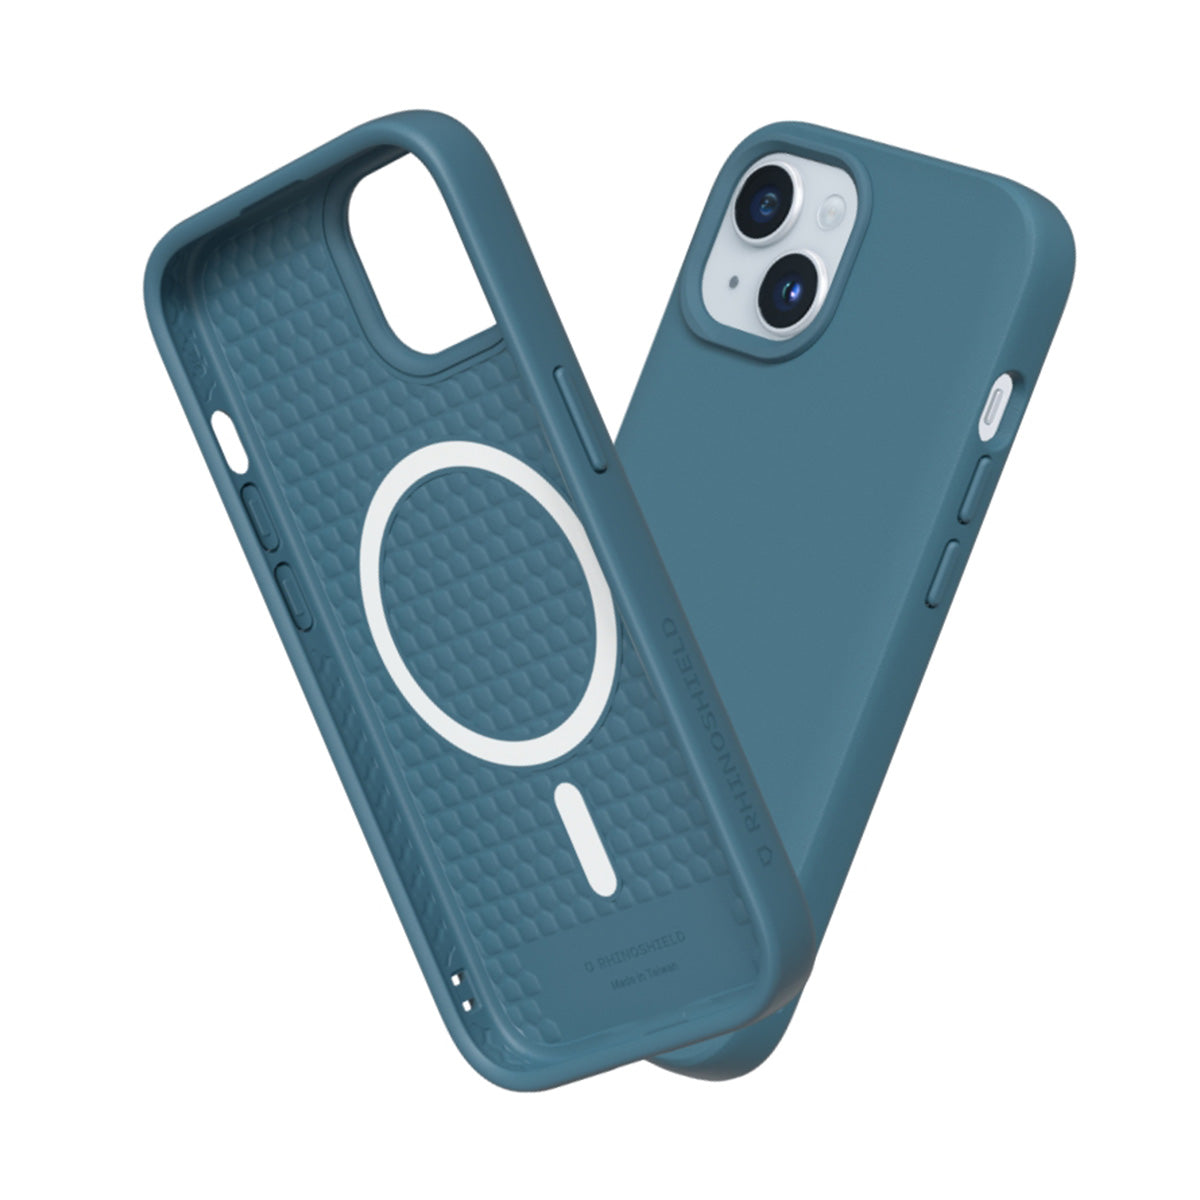 RhinoShield SolidSuit  Protective cases, Phone, Phone cases